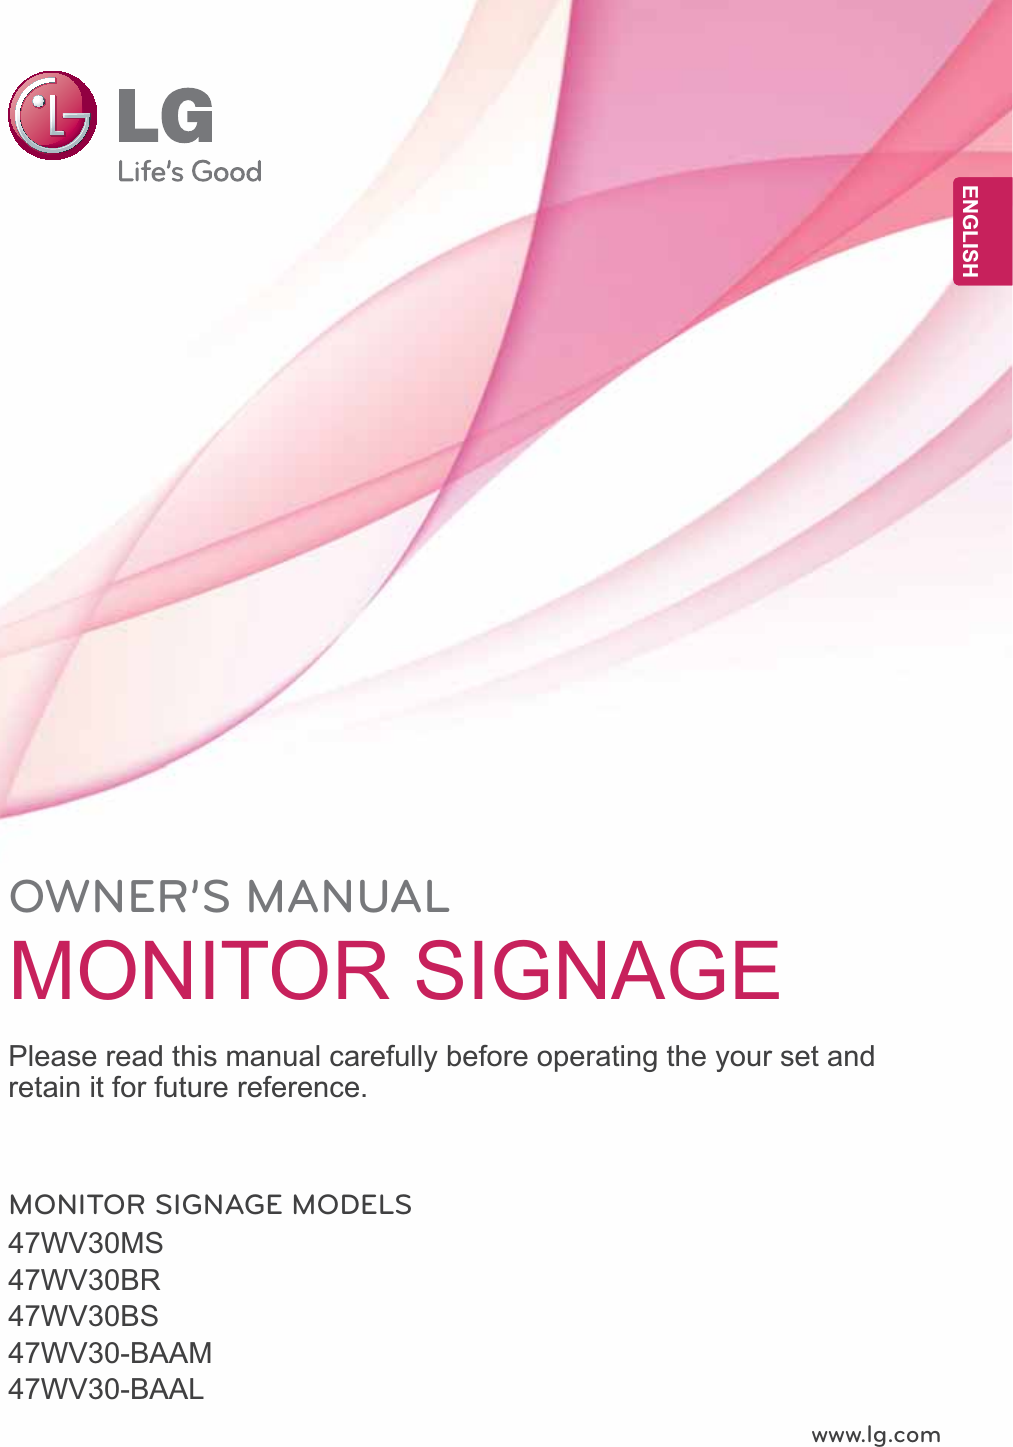 www.lg.comOWNER’S MANUALMONITOR SIGNAGE47WV30MS47WV30BR47WV30BS47WV30-BAAM47WV30-BAALPlease read this manual carefully before operating the your set and retain it for future reference.MONITOR SIGNAGE MODELSENGENGLISH